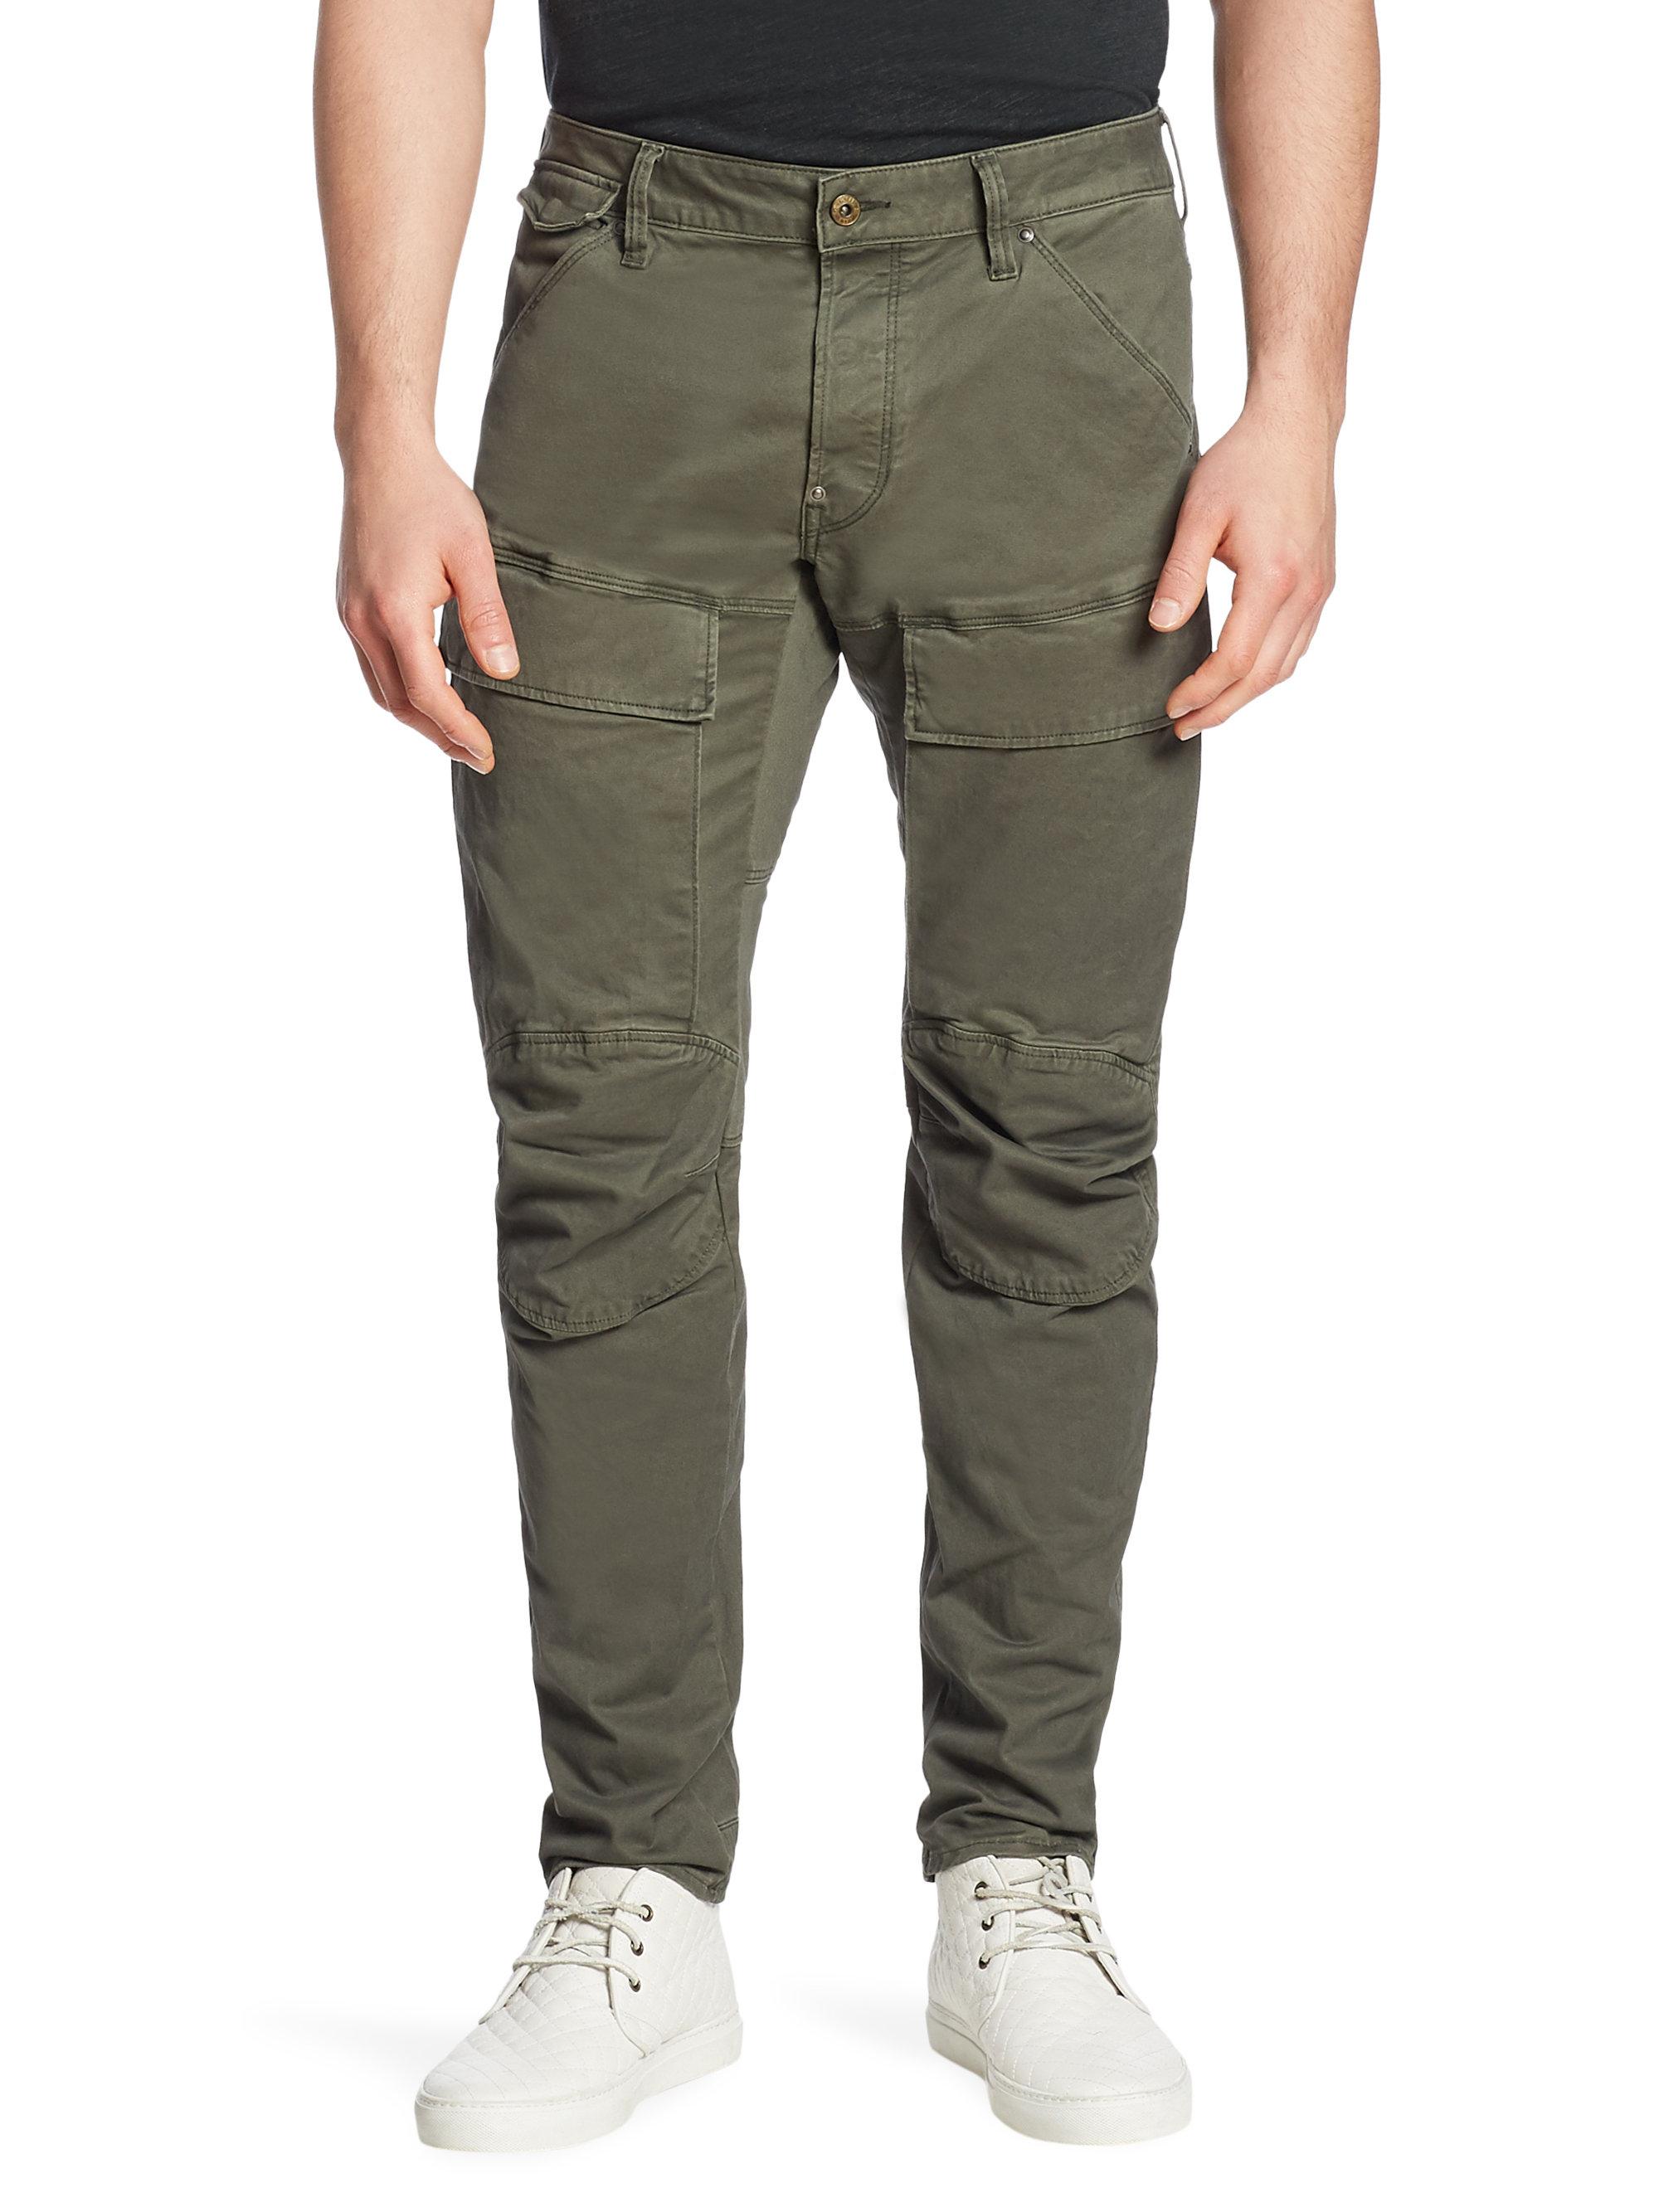 Lyst - G-Star RAW Air Defence 3d Cargo Pants in Green for Men